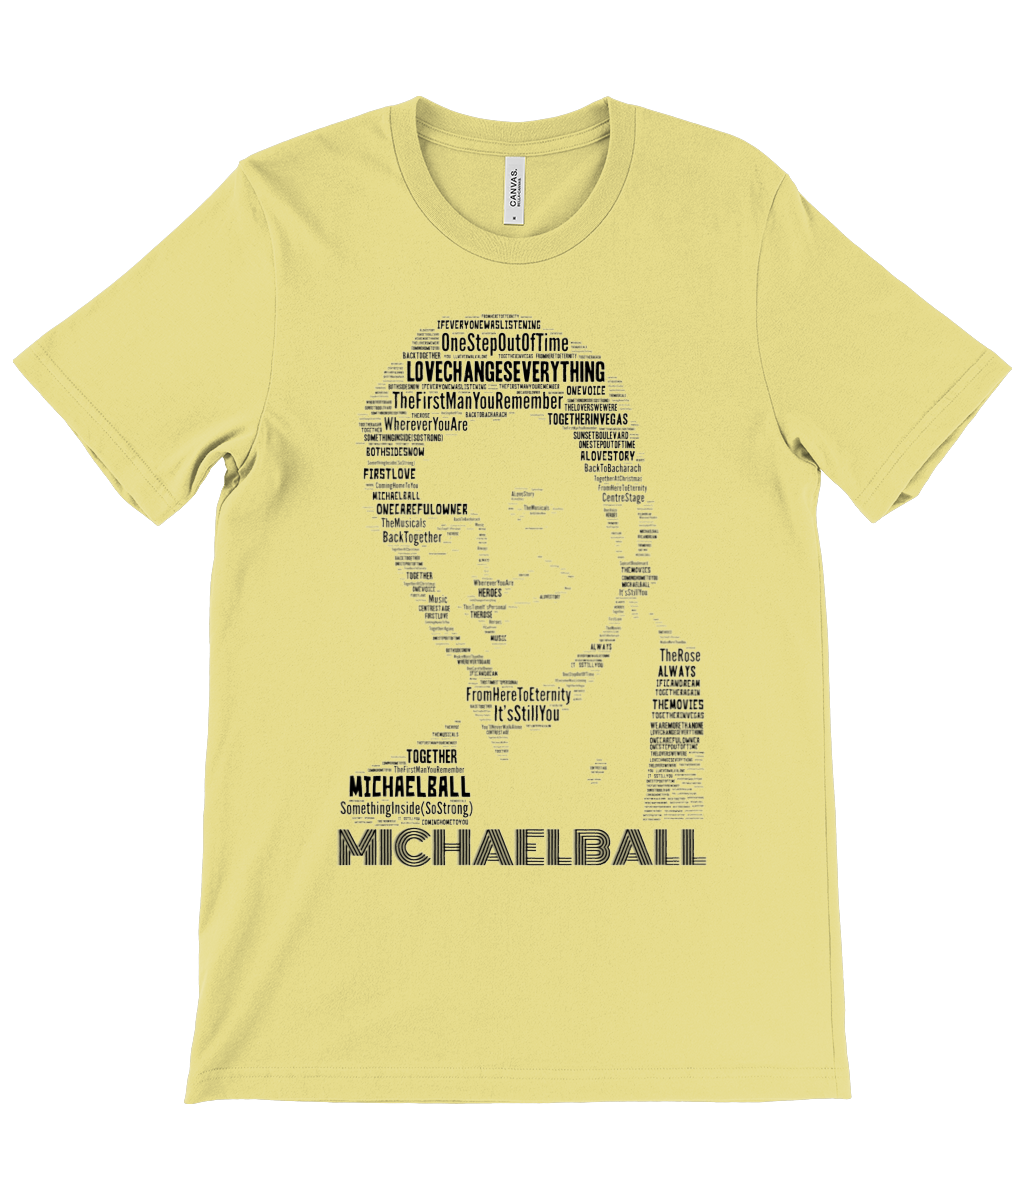 Michael Ball A Portrait in songs / Premium Supersoft T Shirt